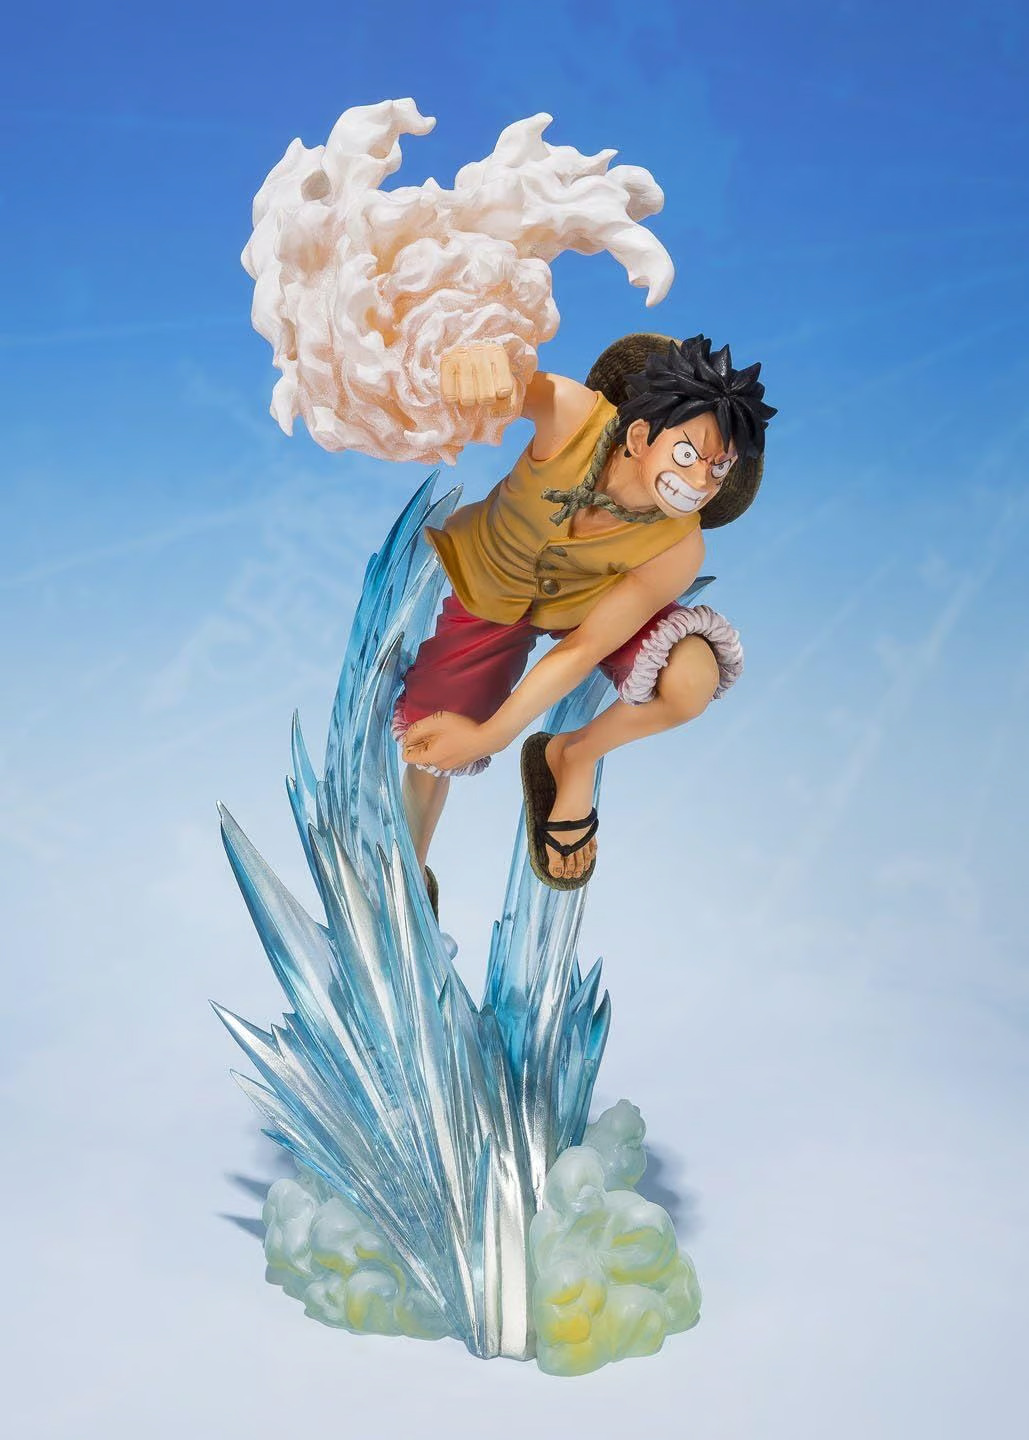 One Piece Figuarts ZERO Extra Battle Monkey D. Luffy Brother\'s Bond by BANDAI